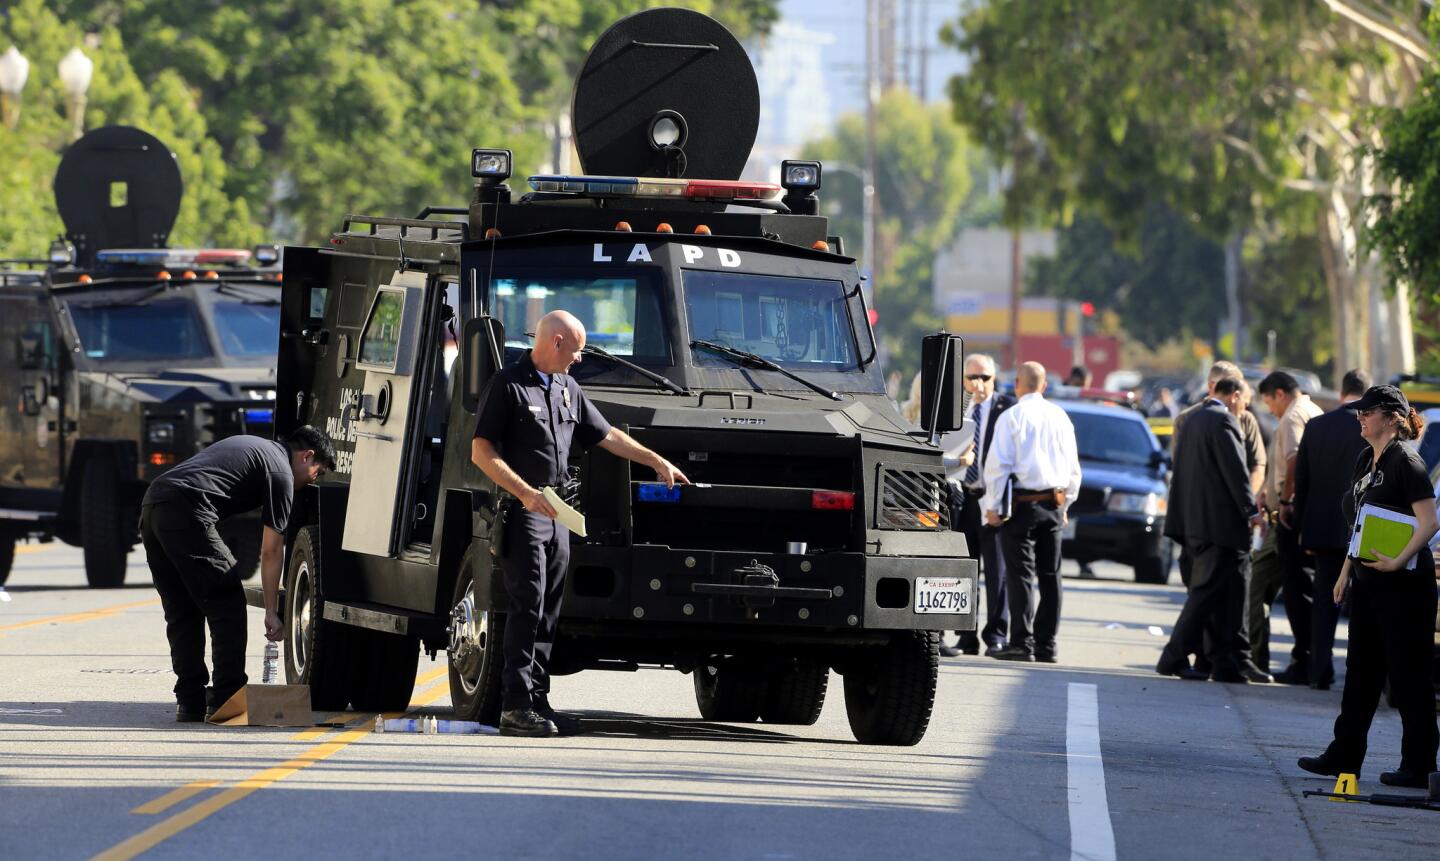 Los Angeles Police Cmdr. Andrew Smith looks at the damage to an LAPD BearCat, a wheeled armored personnel carrier, after an officer involved shooting that killed a man early Monday morning.